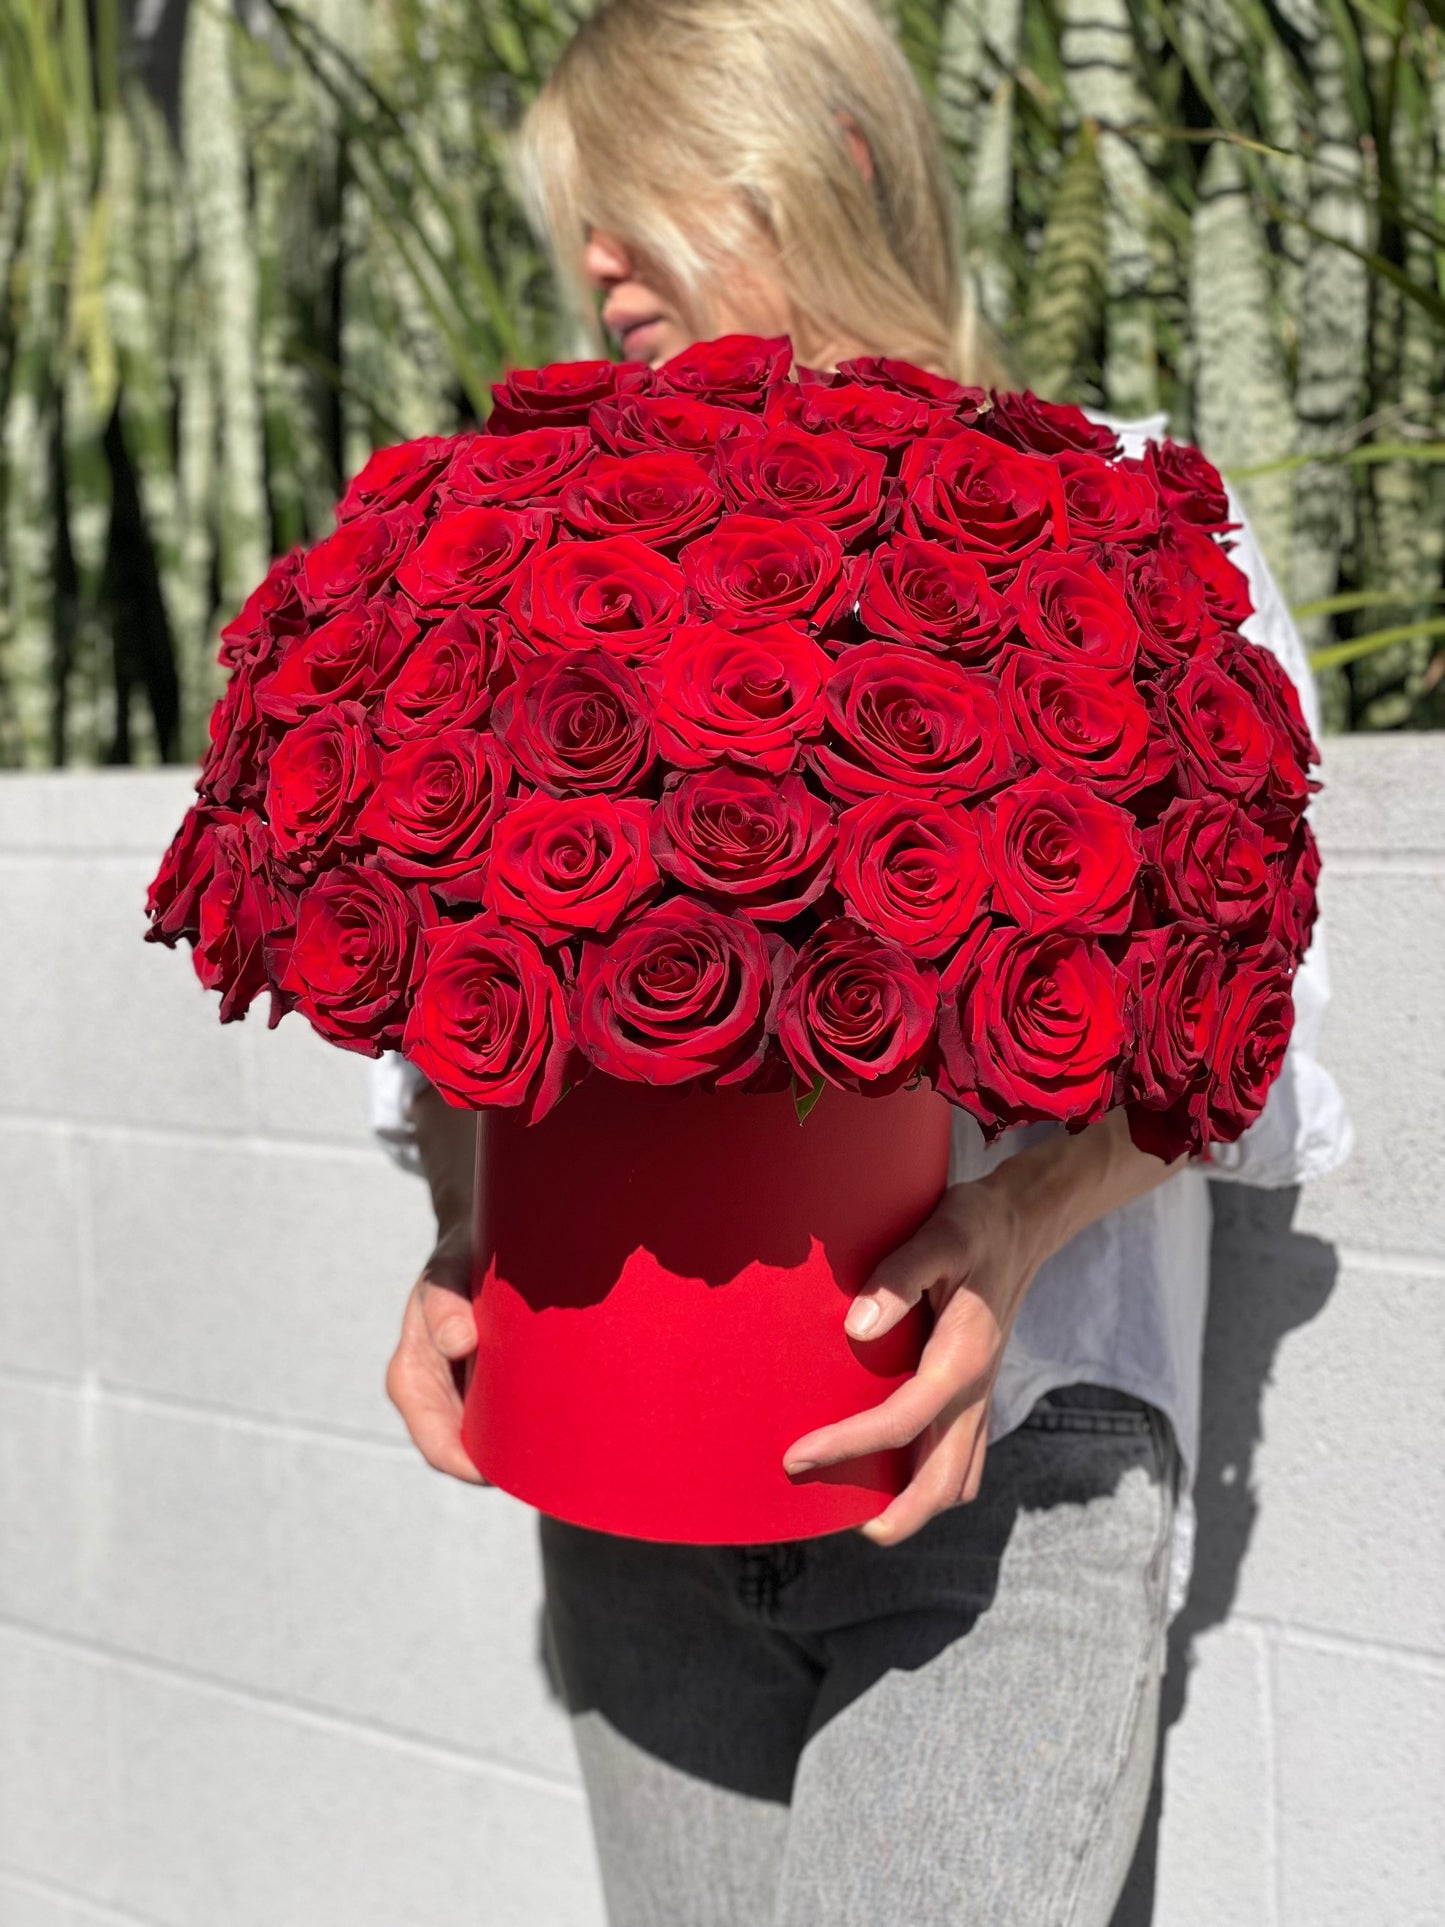 Box of 50 gorgeous red roses